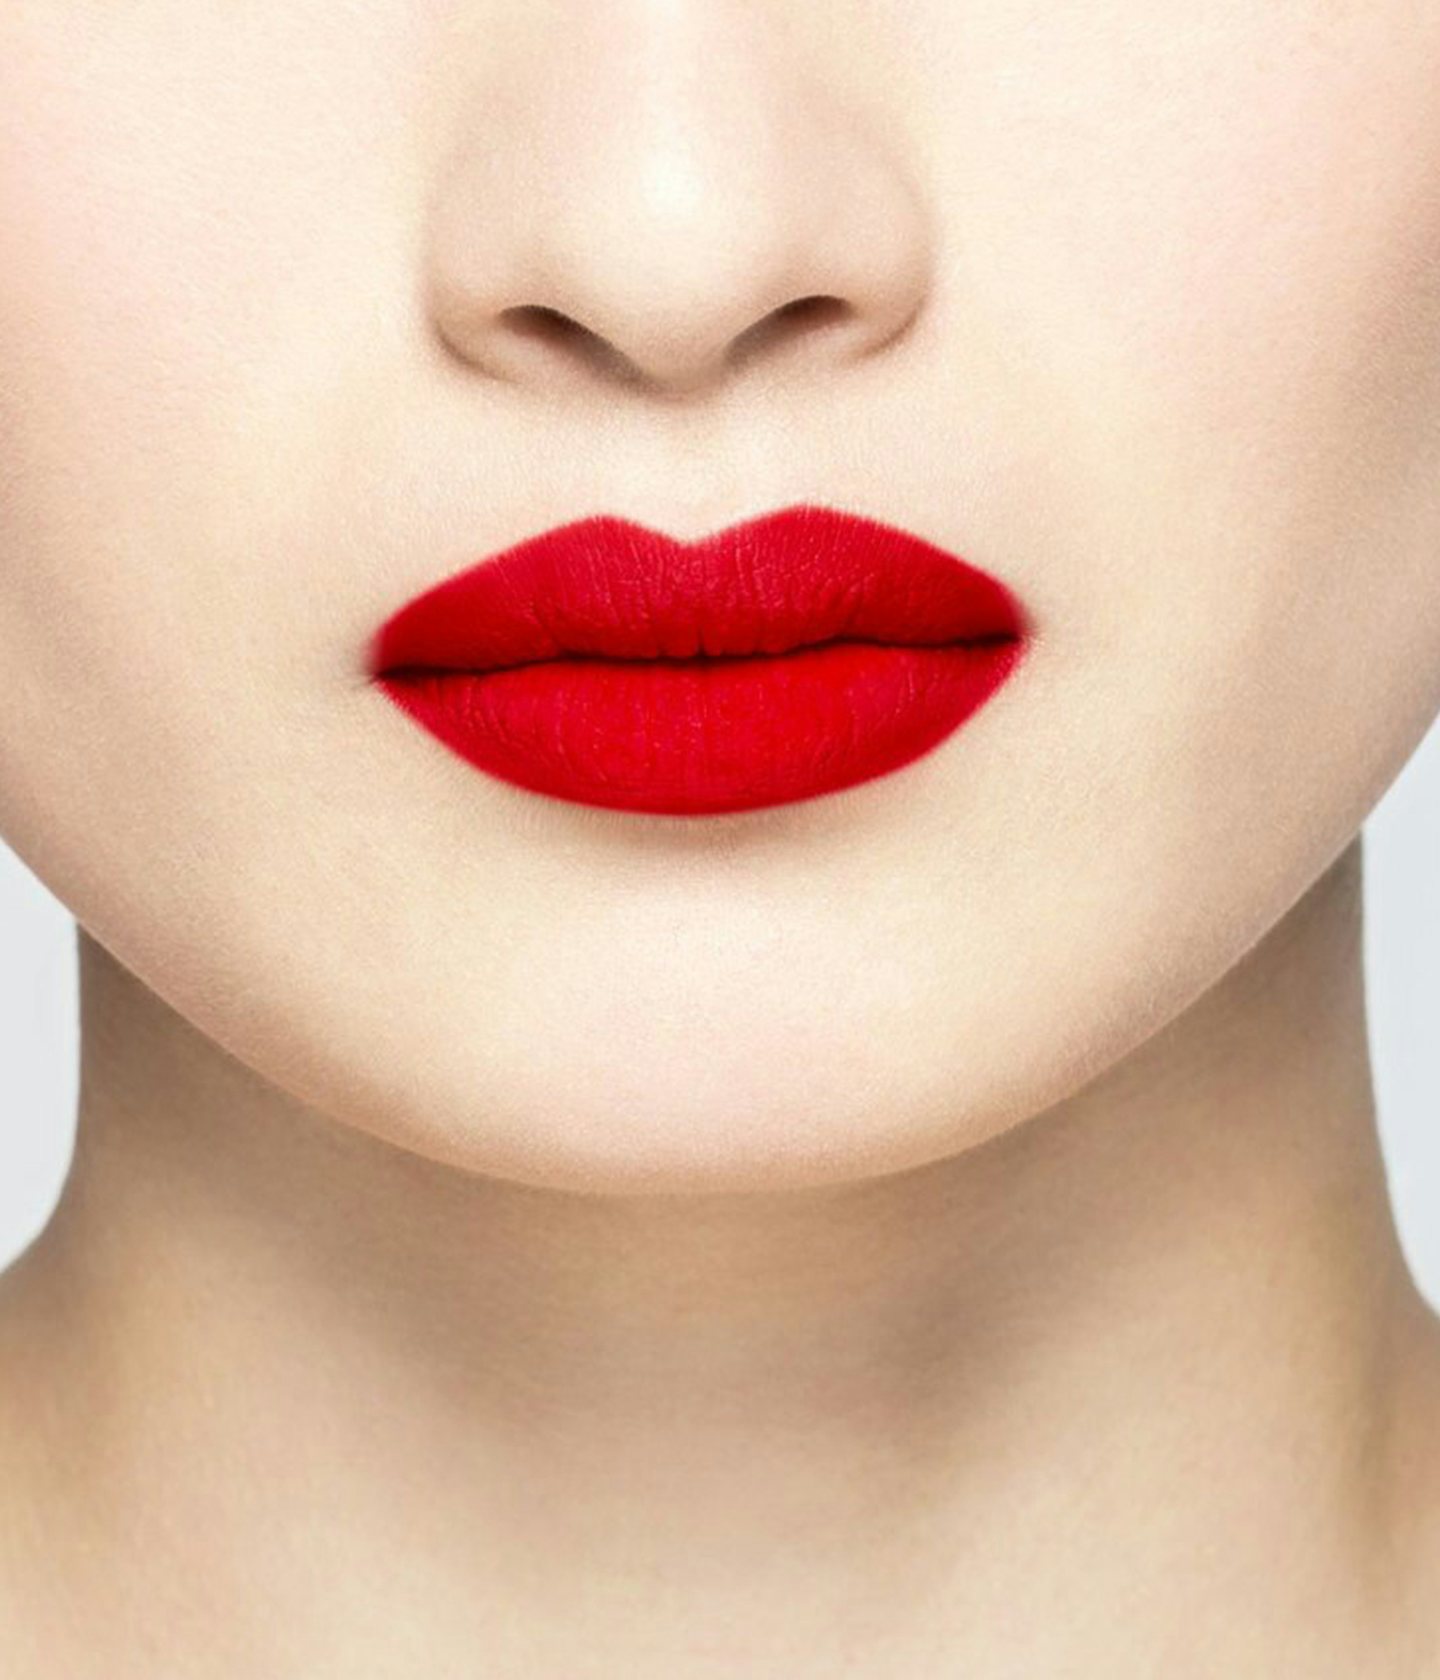 La bouche rouge Rouge Vendôme lipstick shade on the lips of an Asian model